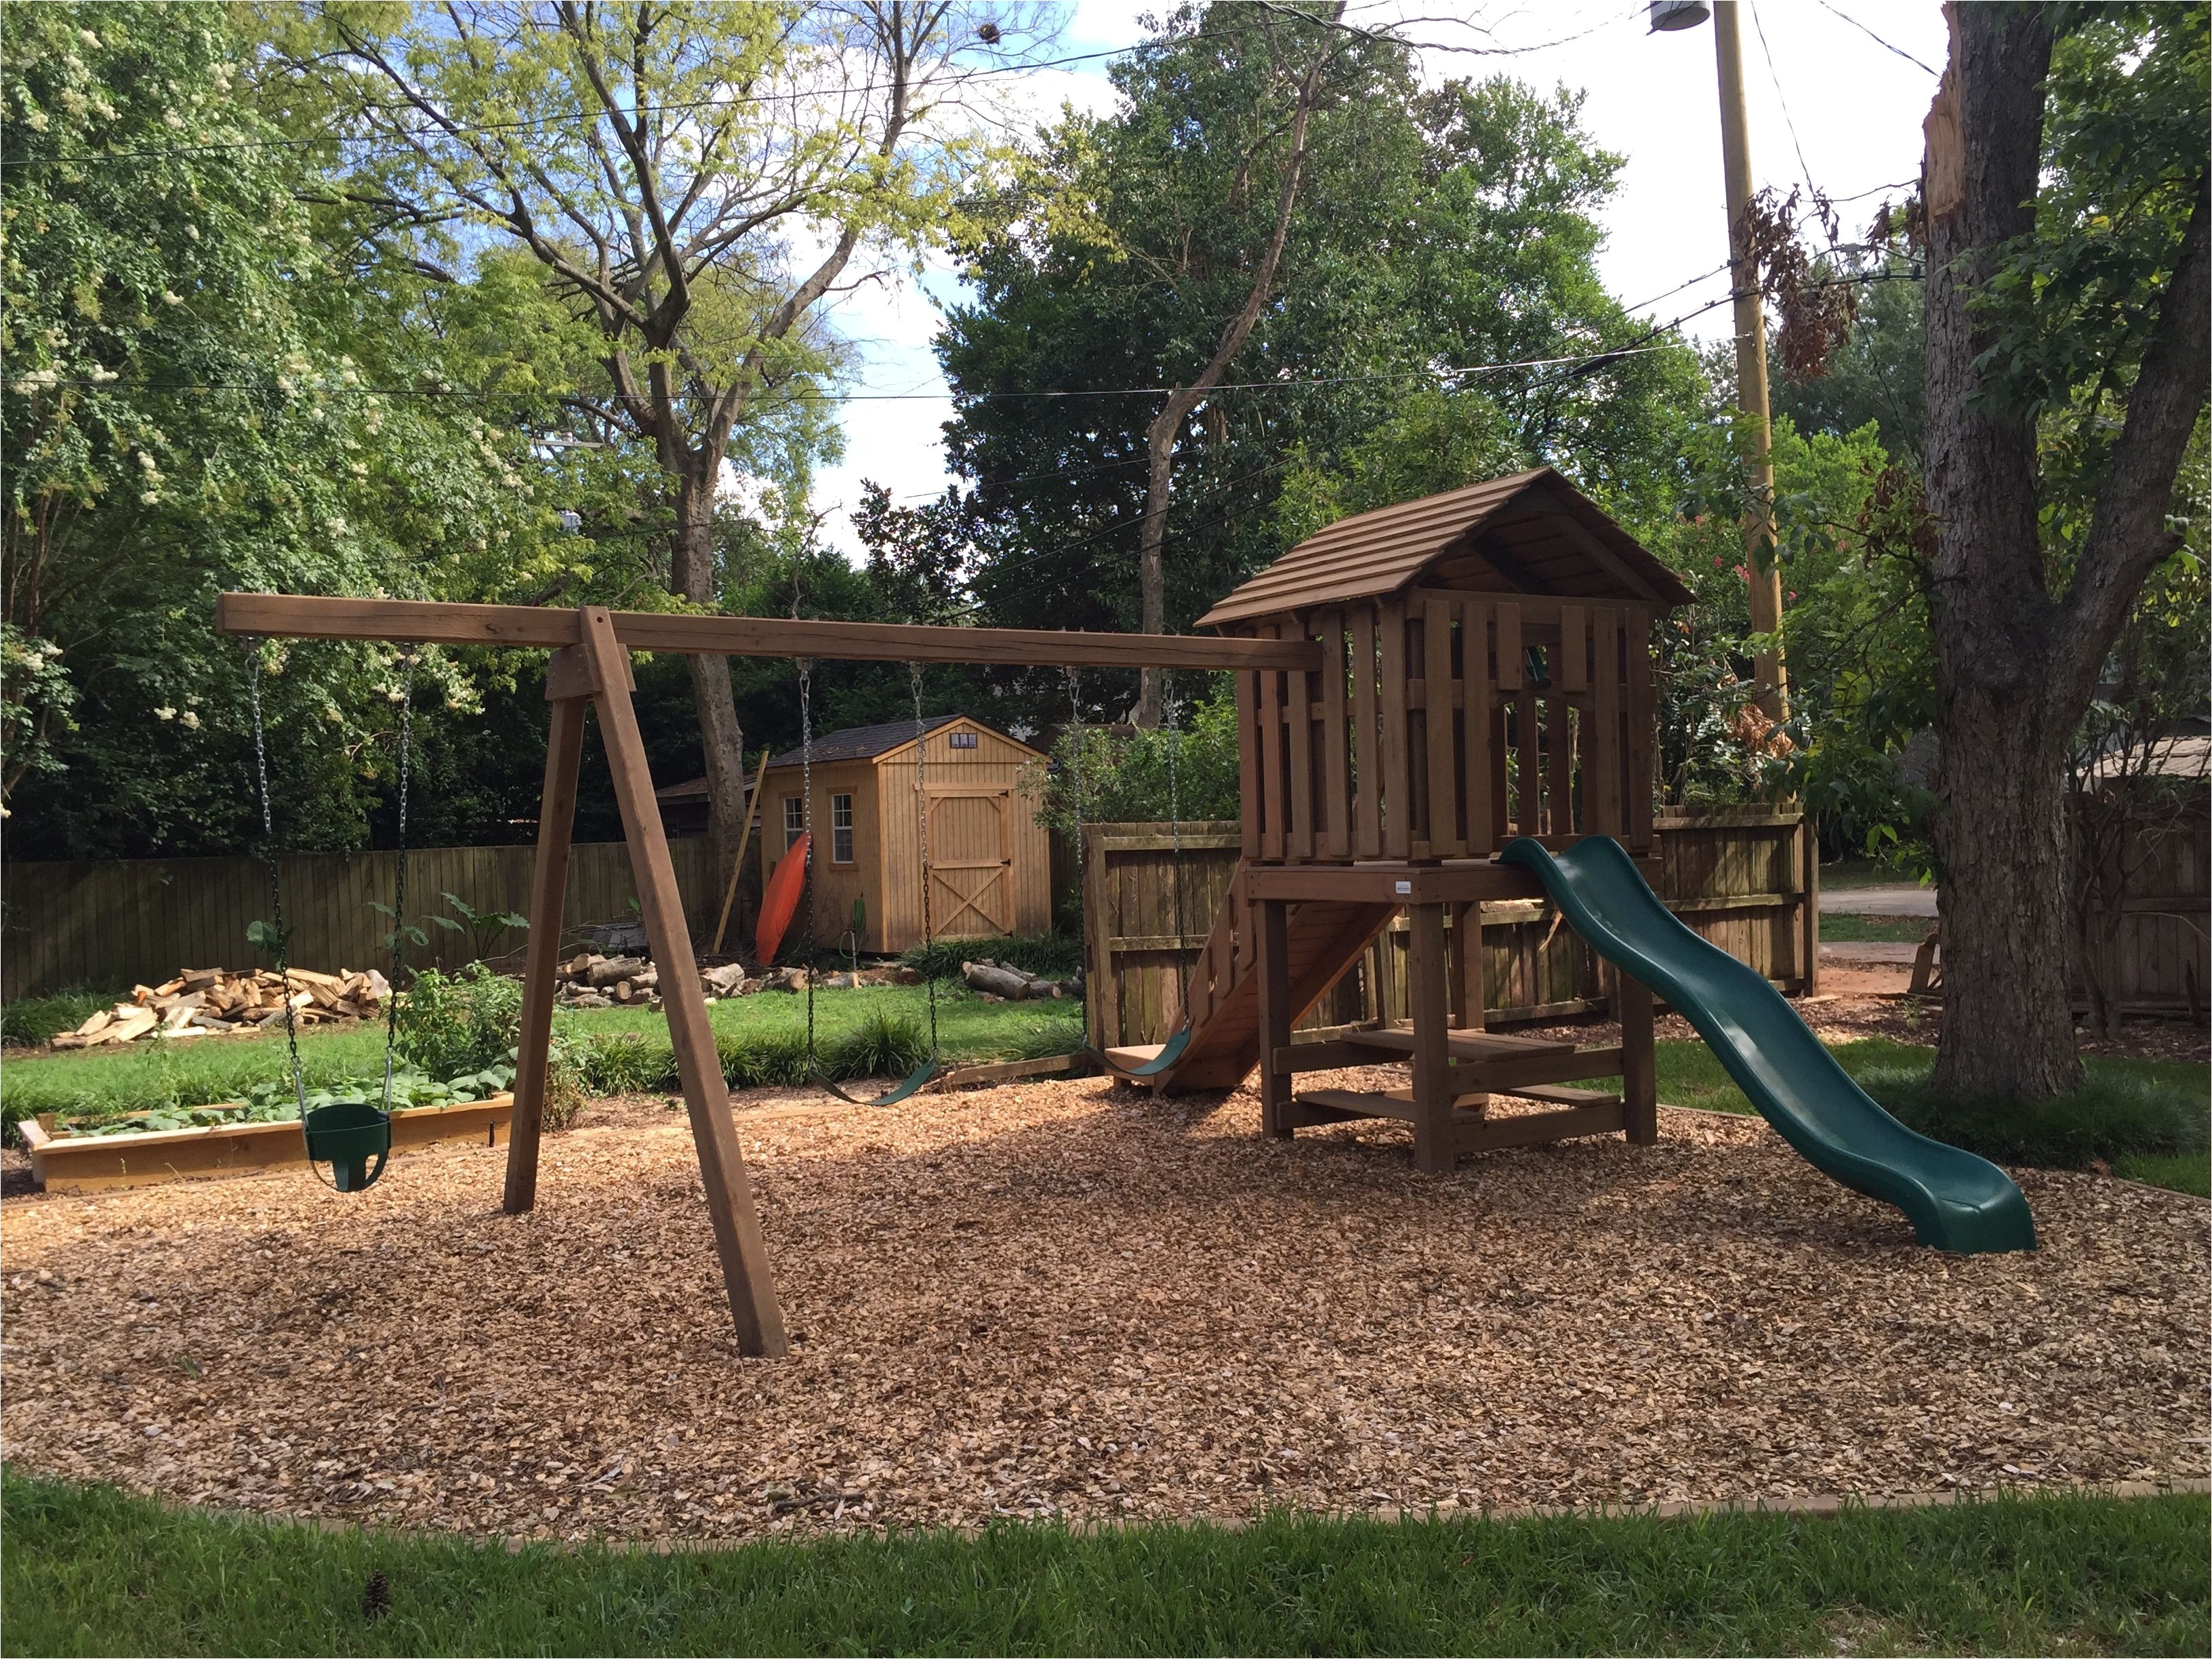 e of our very popular models with a great wood chip ground cover playsets wooden custom